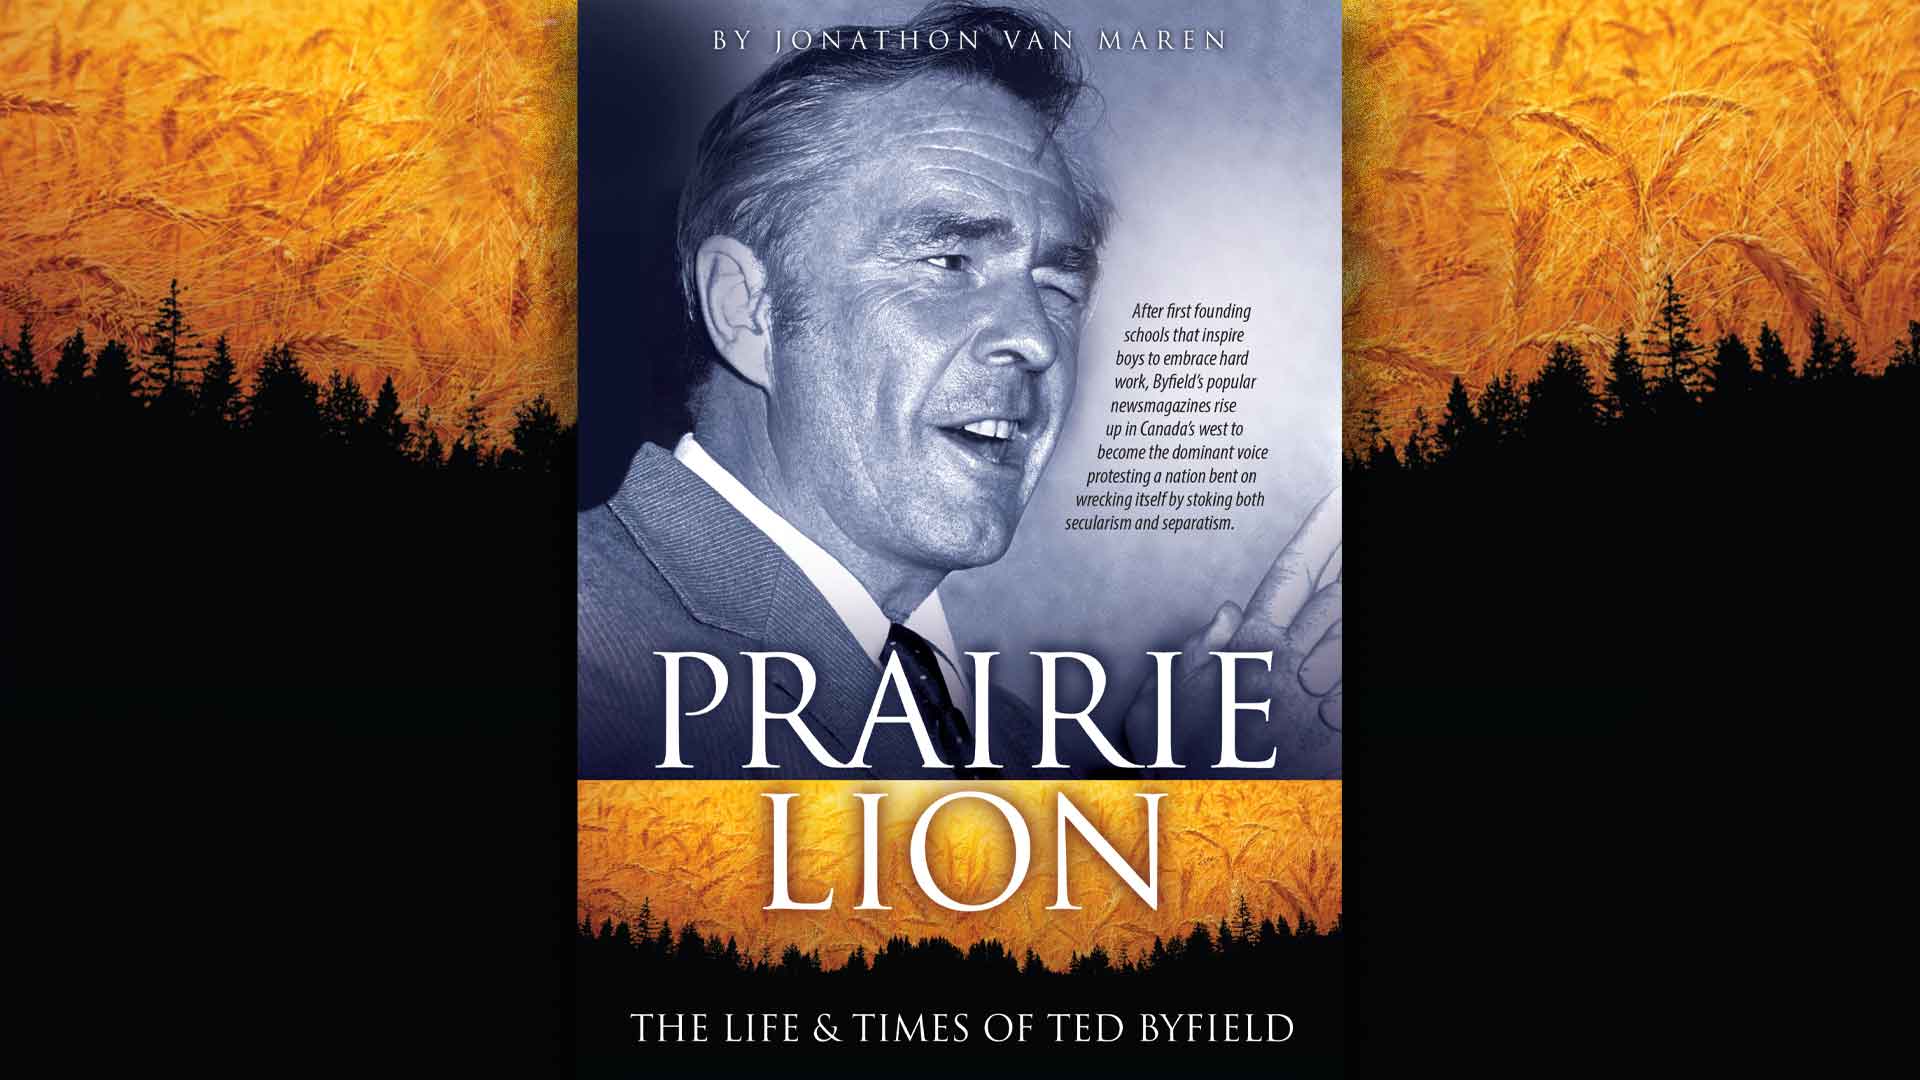 The Interim: Prairie Lion is "the biography Ted Byfield deserves"